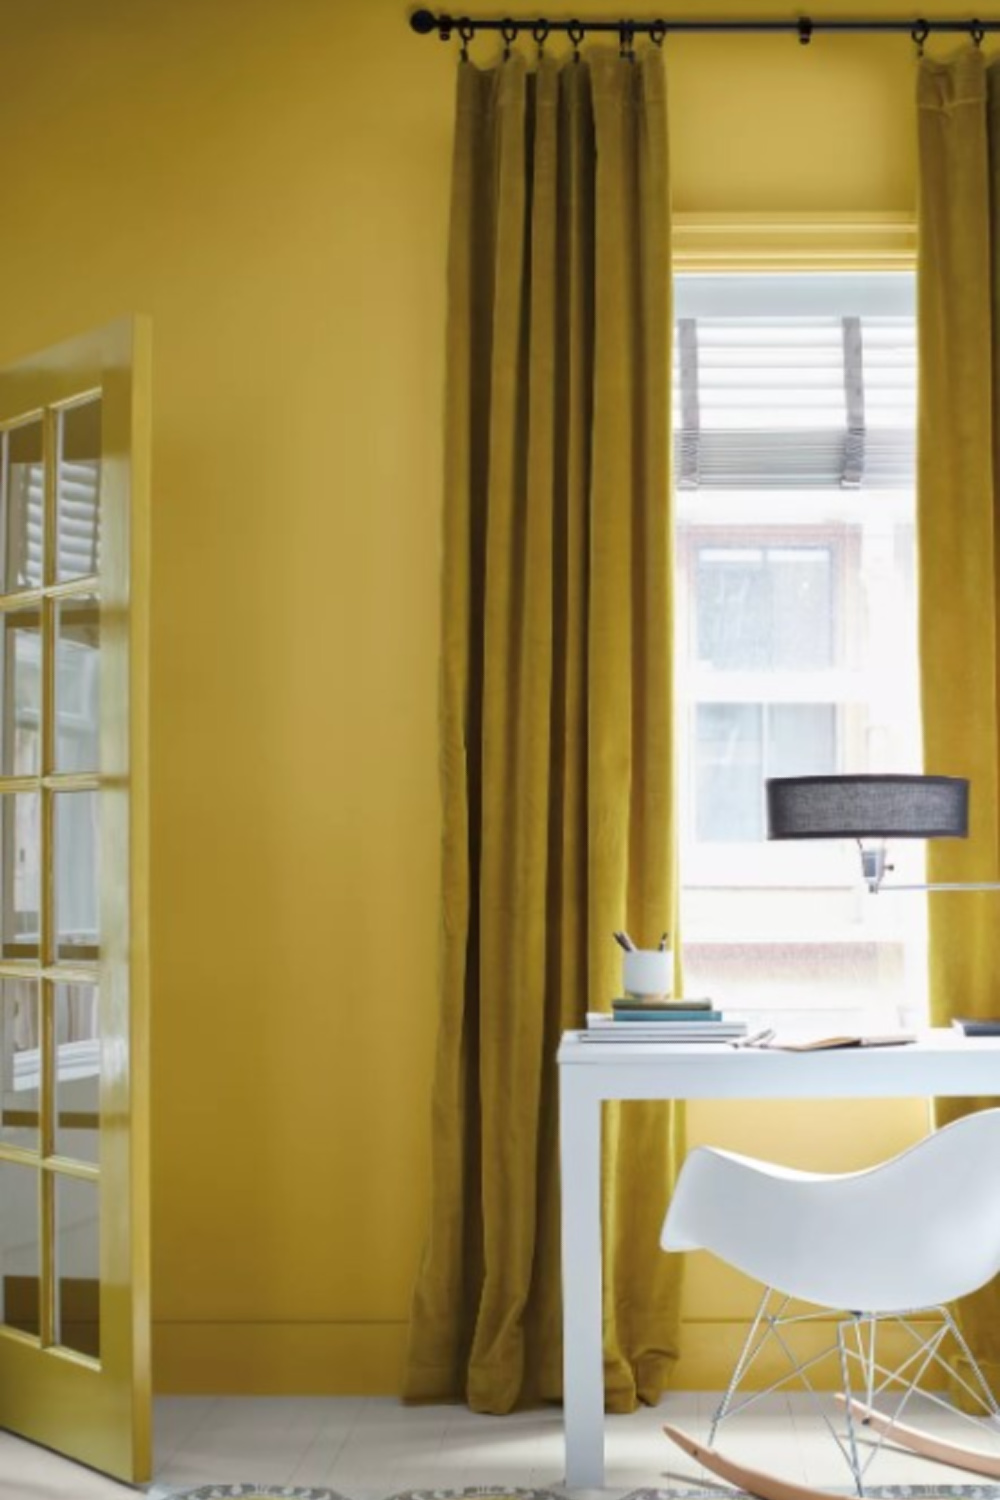 Savannah Green 2150-30 Benjamin Moore paint color - a trending yellow green ochre color with a chic style.